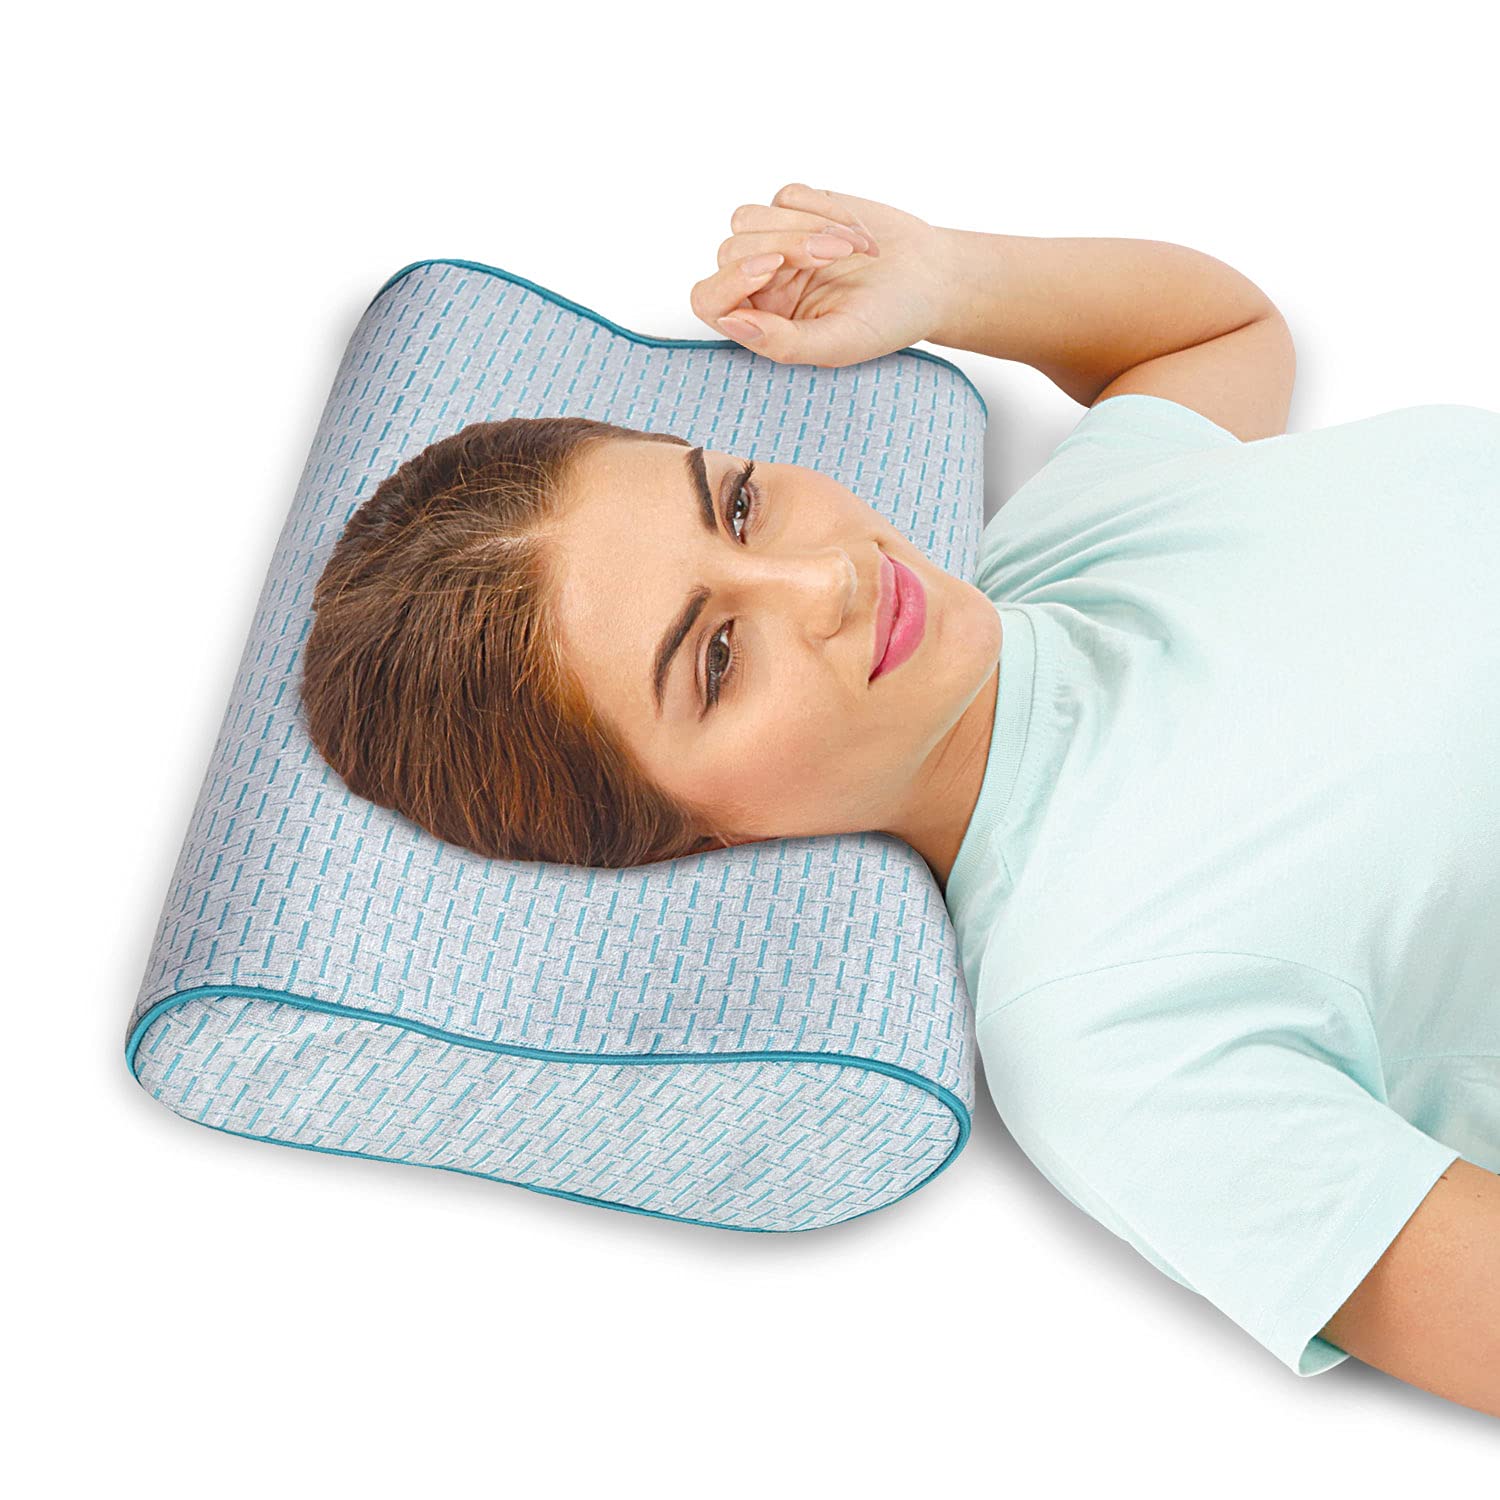 Cervical pillow memory foam contoured for neck and shoulder pain relief  ortopeadic universal size men and women